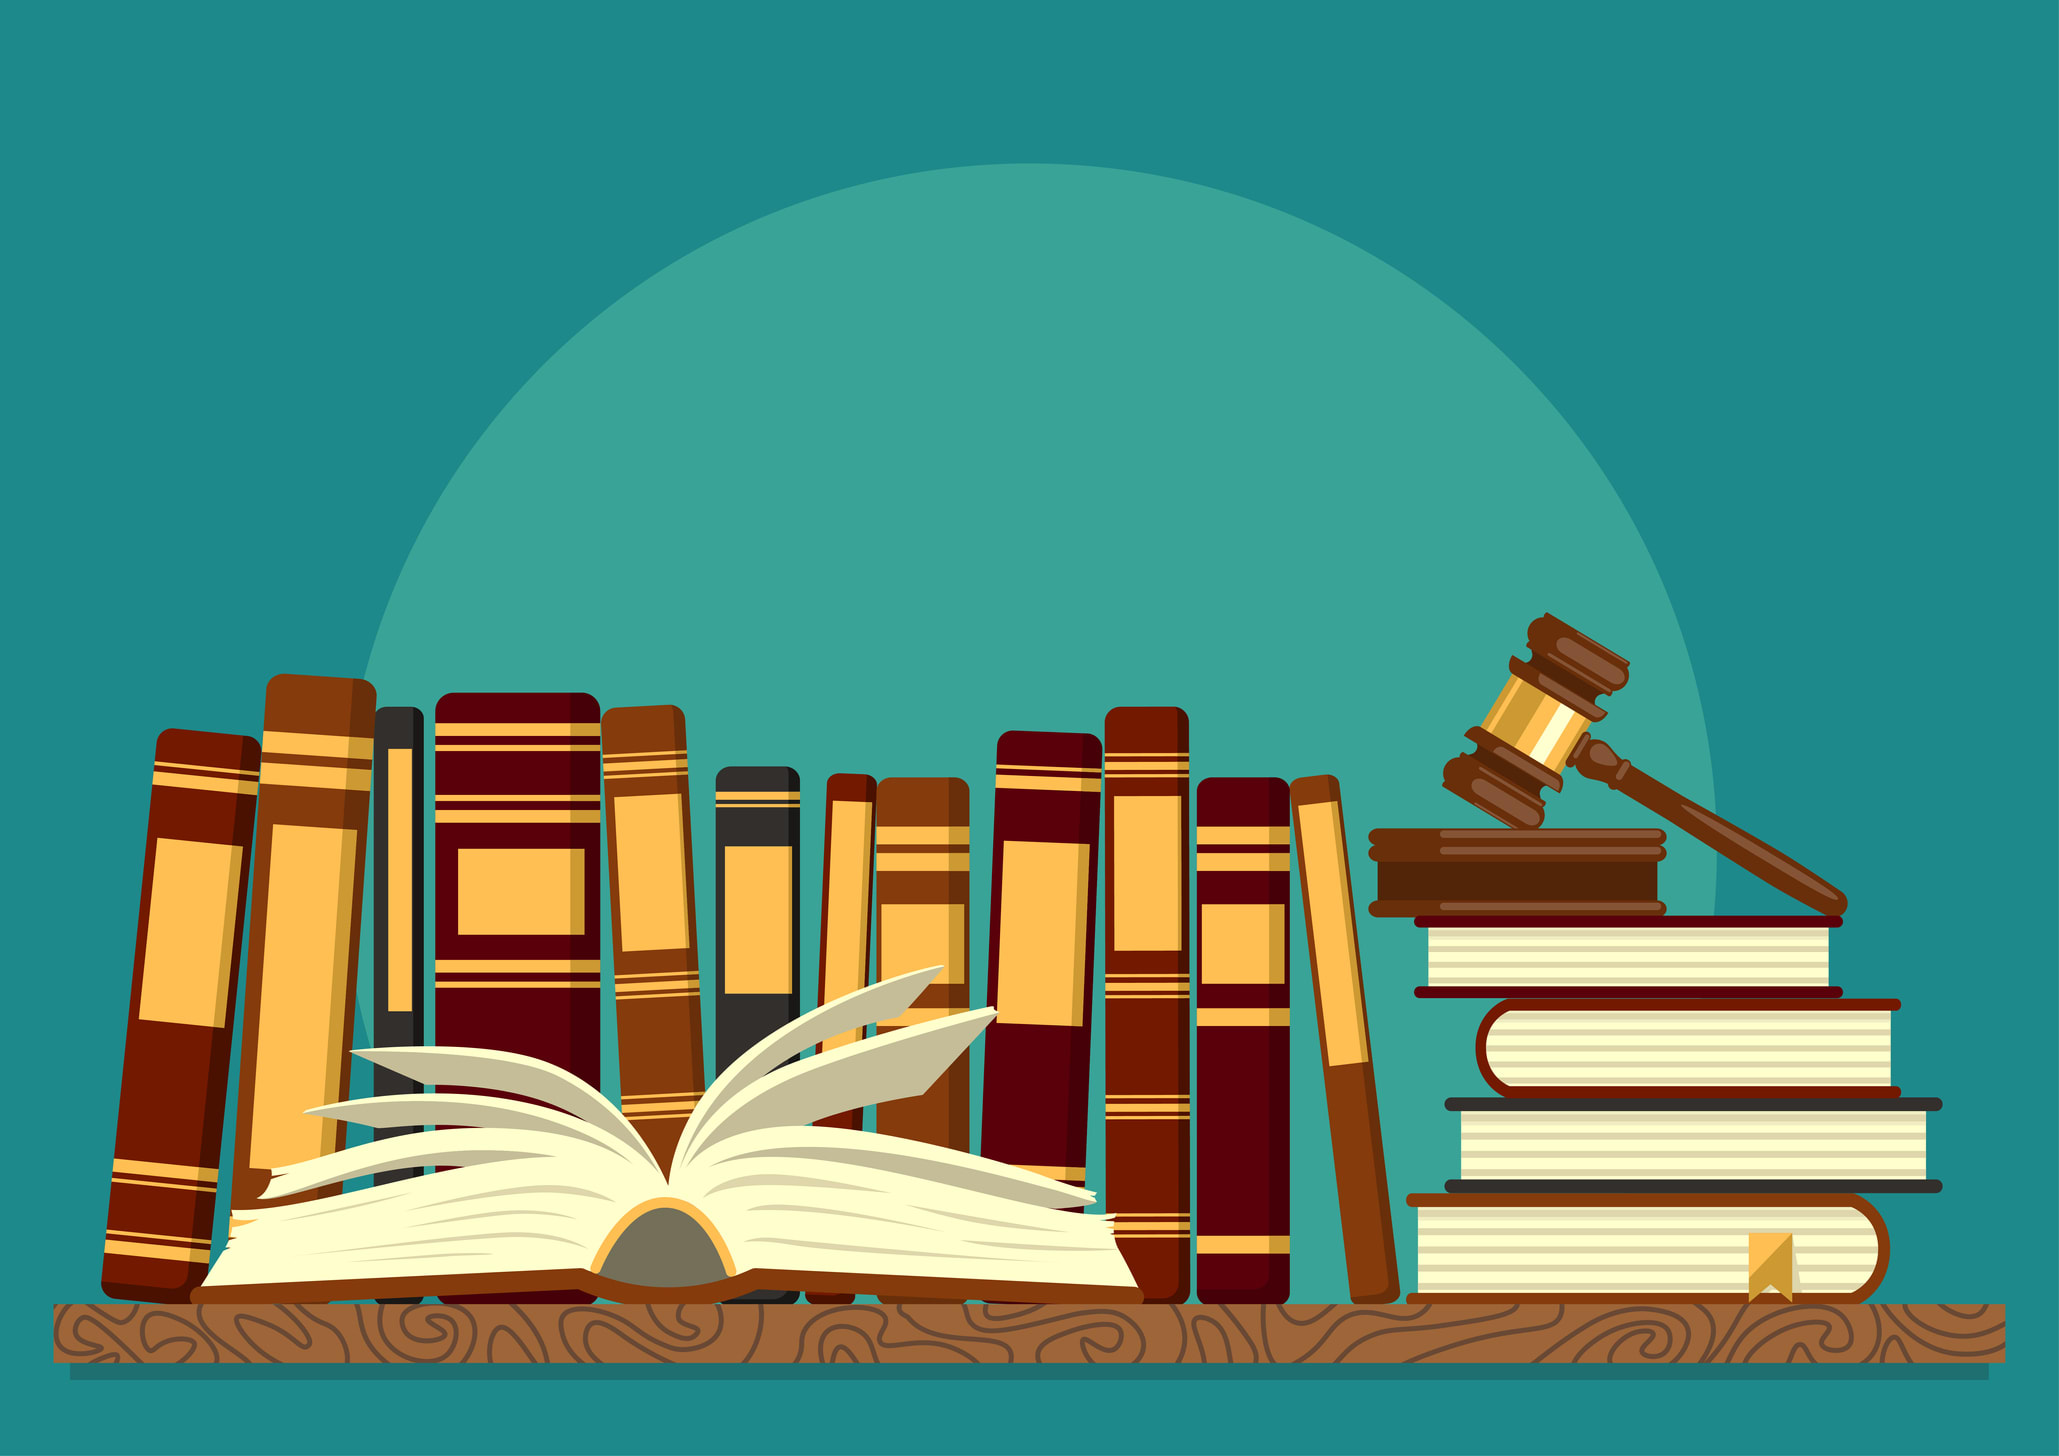 Books on shelf with open book and judge gavel on teal background